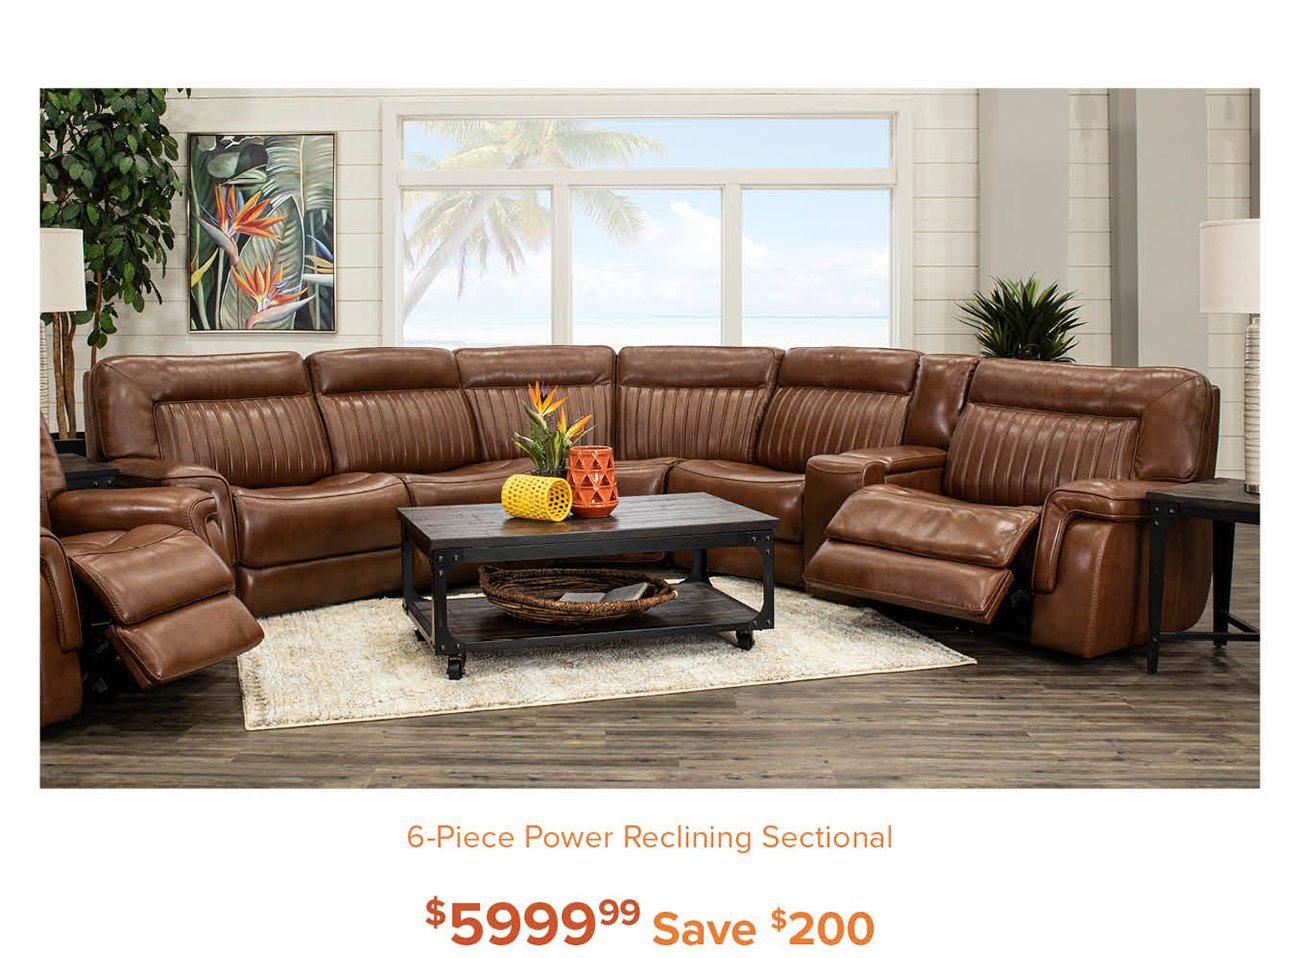 Power-reclining-sectional